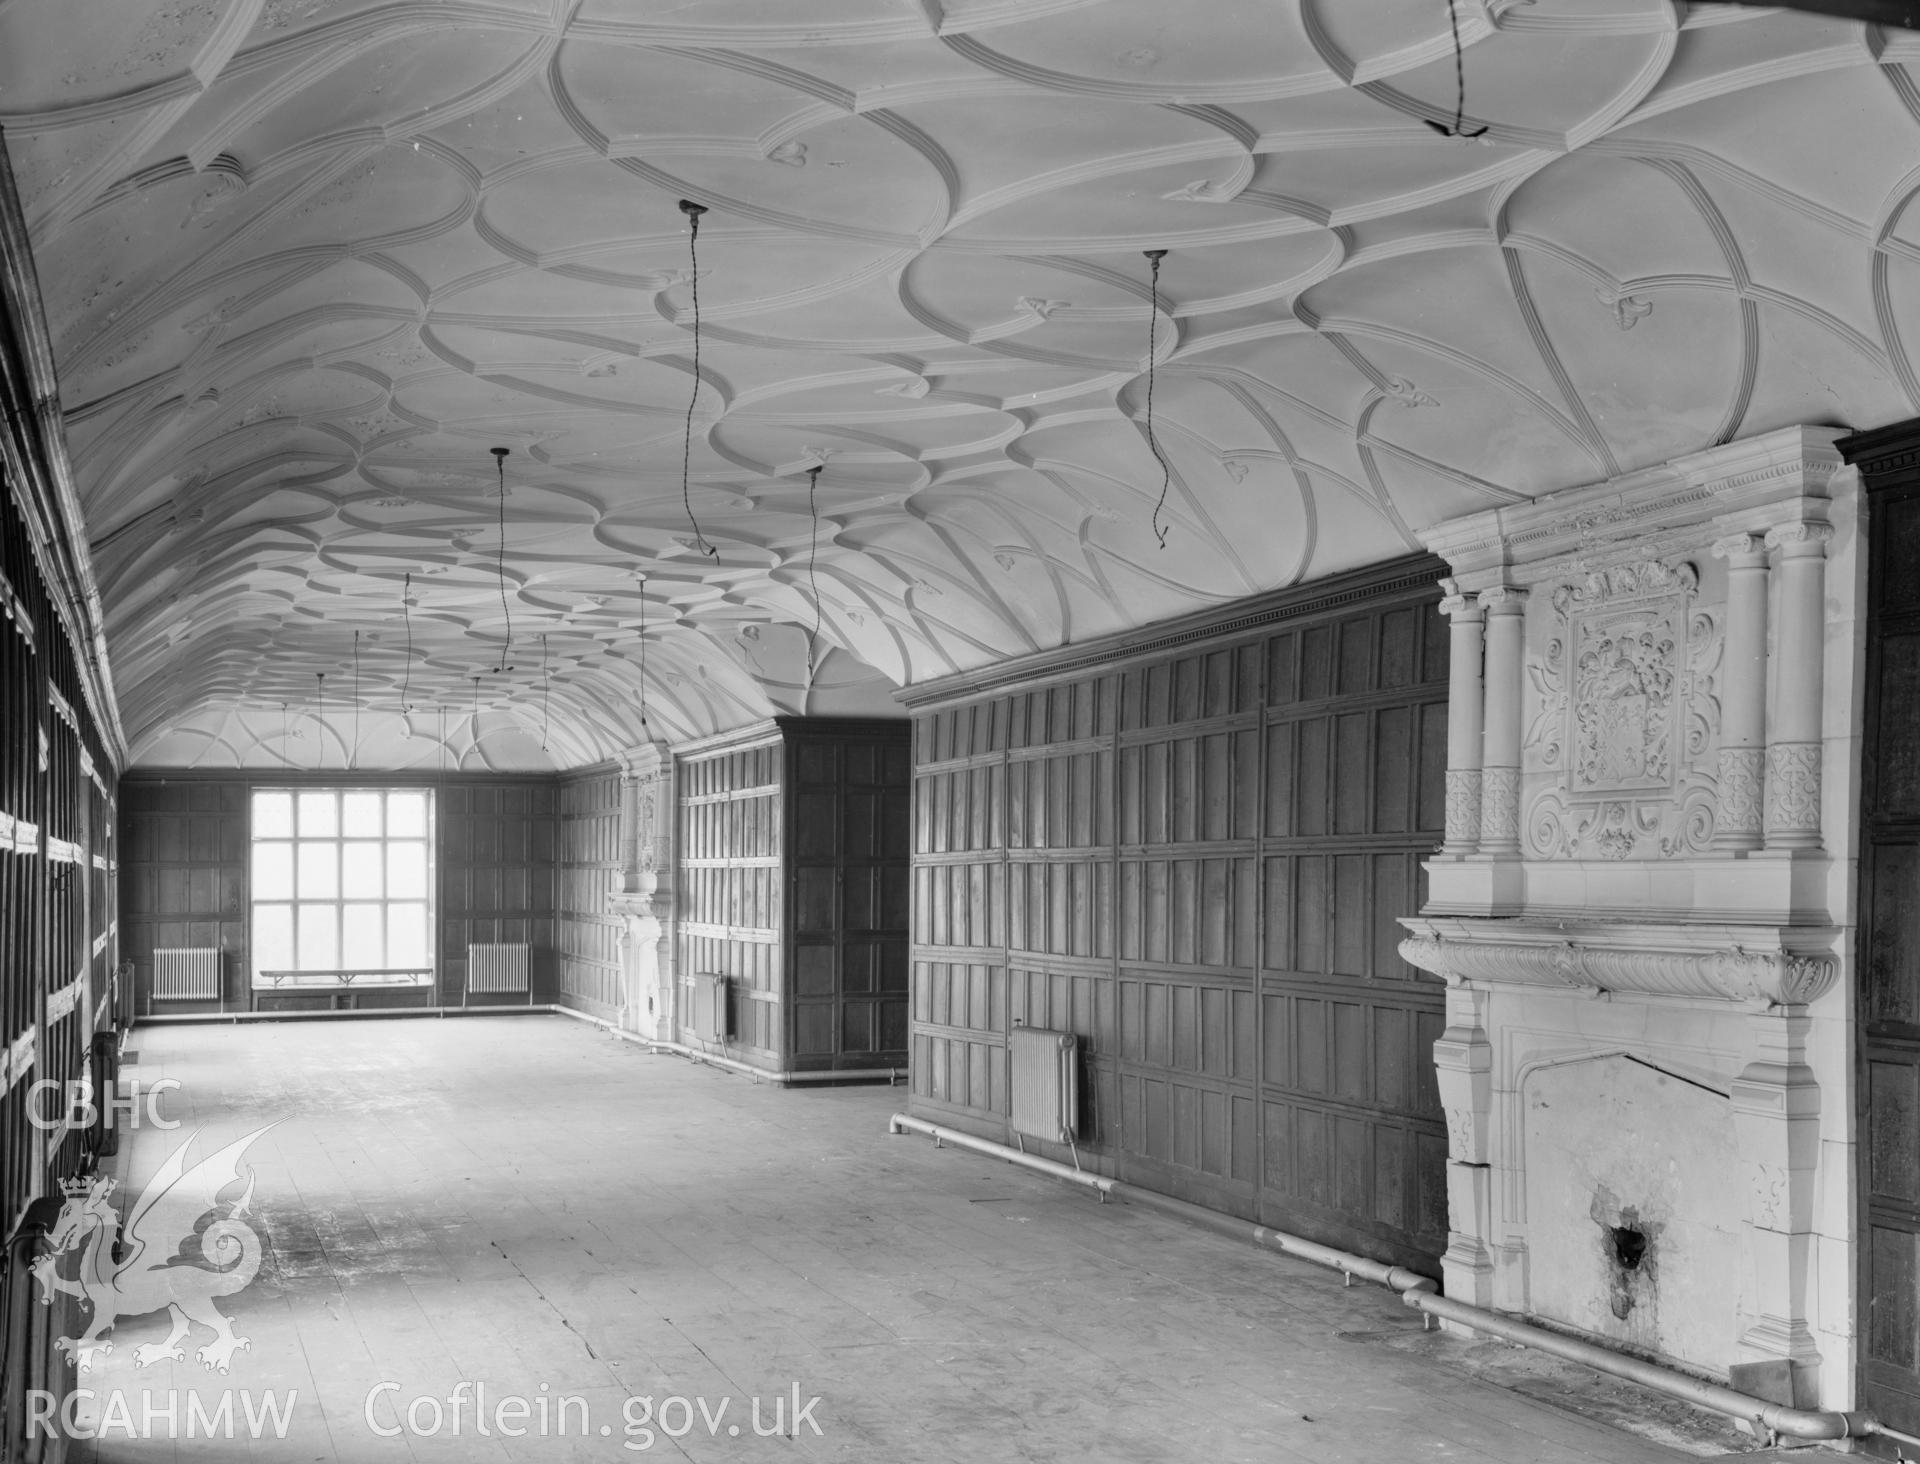 Interior view of Aberpergwn House showing hall with fireplace and decorated ceiling, taken 13.08.65.